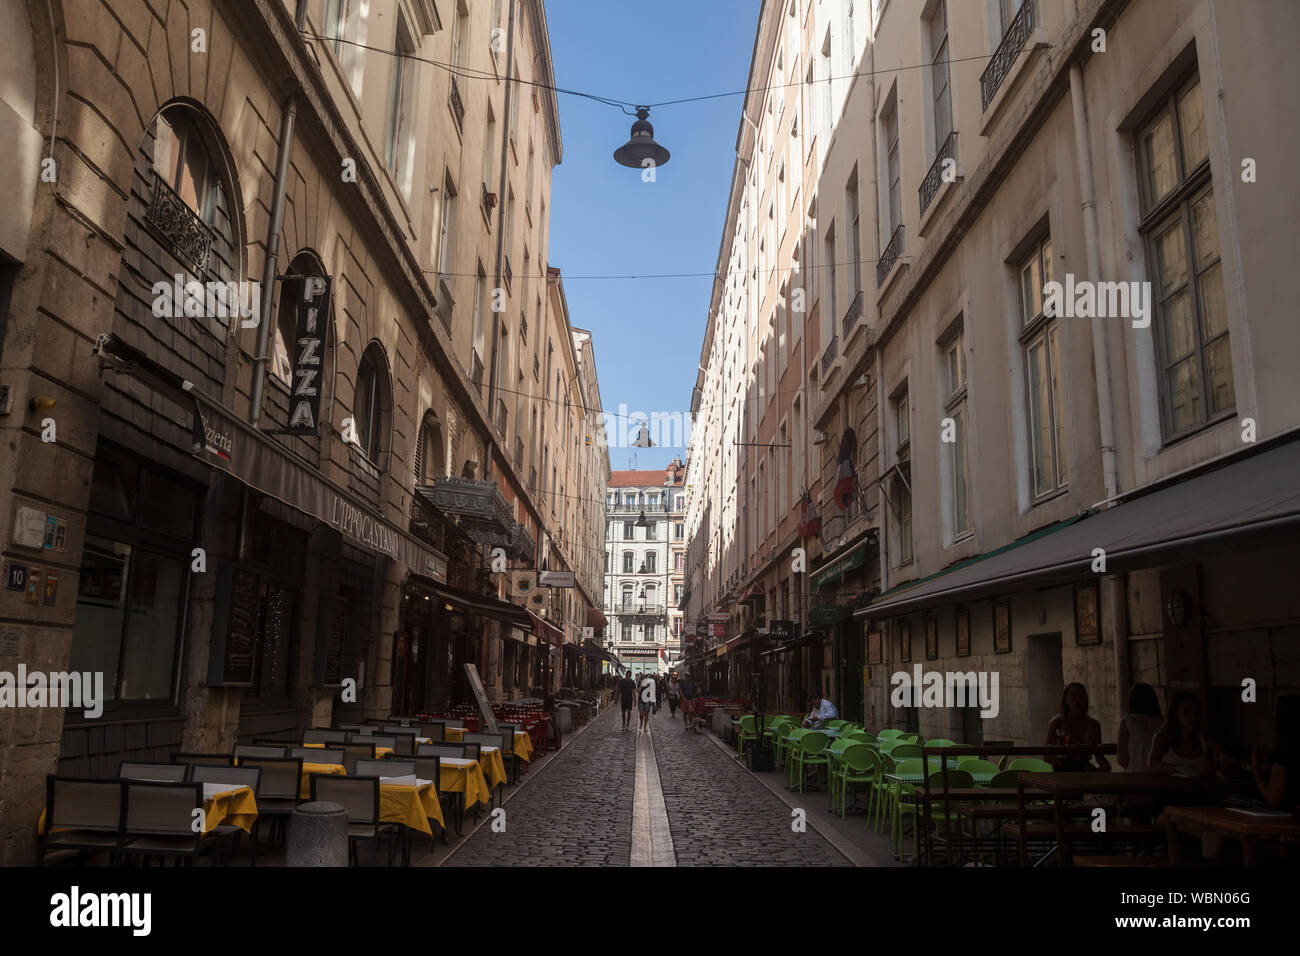 LYON, FRANCE - JULY 19, 2019: Typical narrow street of the Vieux Lyon (old Lyon) on the Presqu'ile district with tourists passing by near restaurants Stock Photo